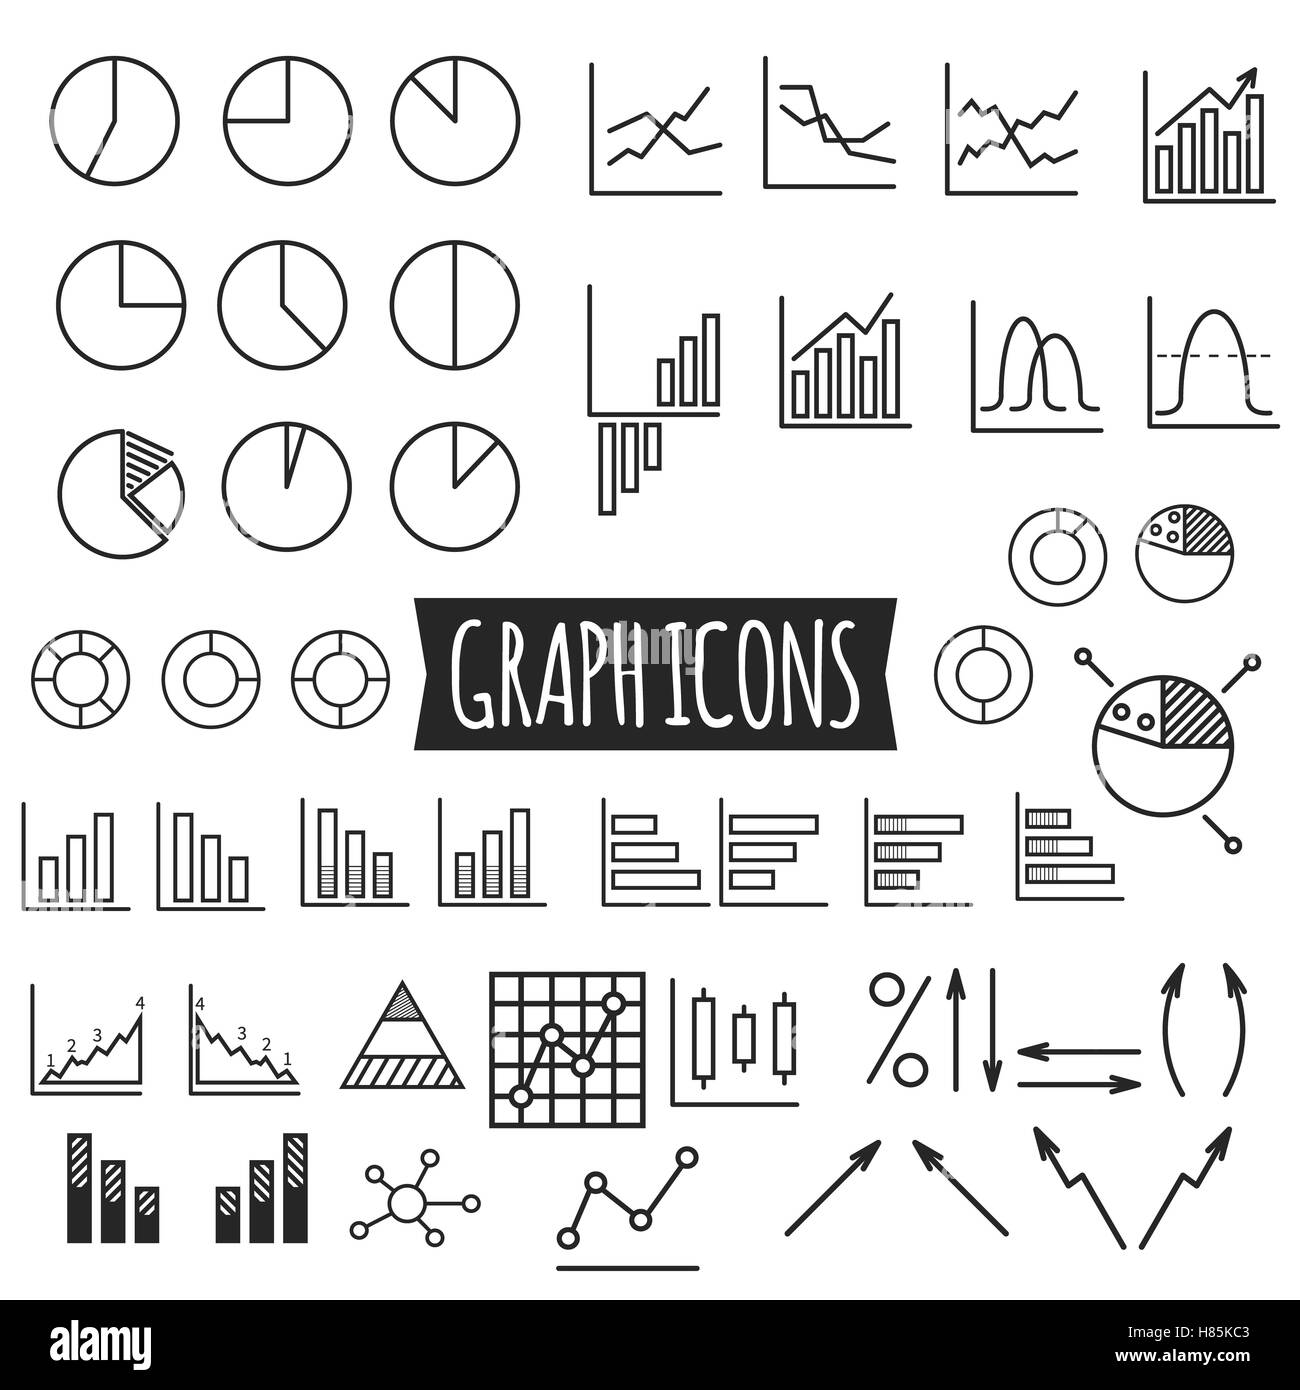 Business charts. Set of thin line graph icons. Outline. Can be use as elements in infographics, as web and mobile icons etc. Easy to recolor and resize. illustration Stock Photo